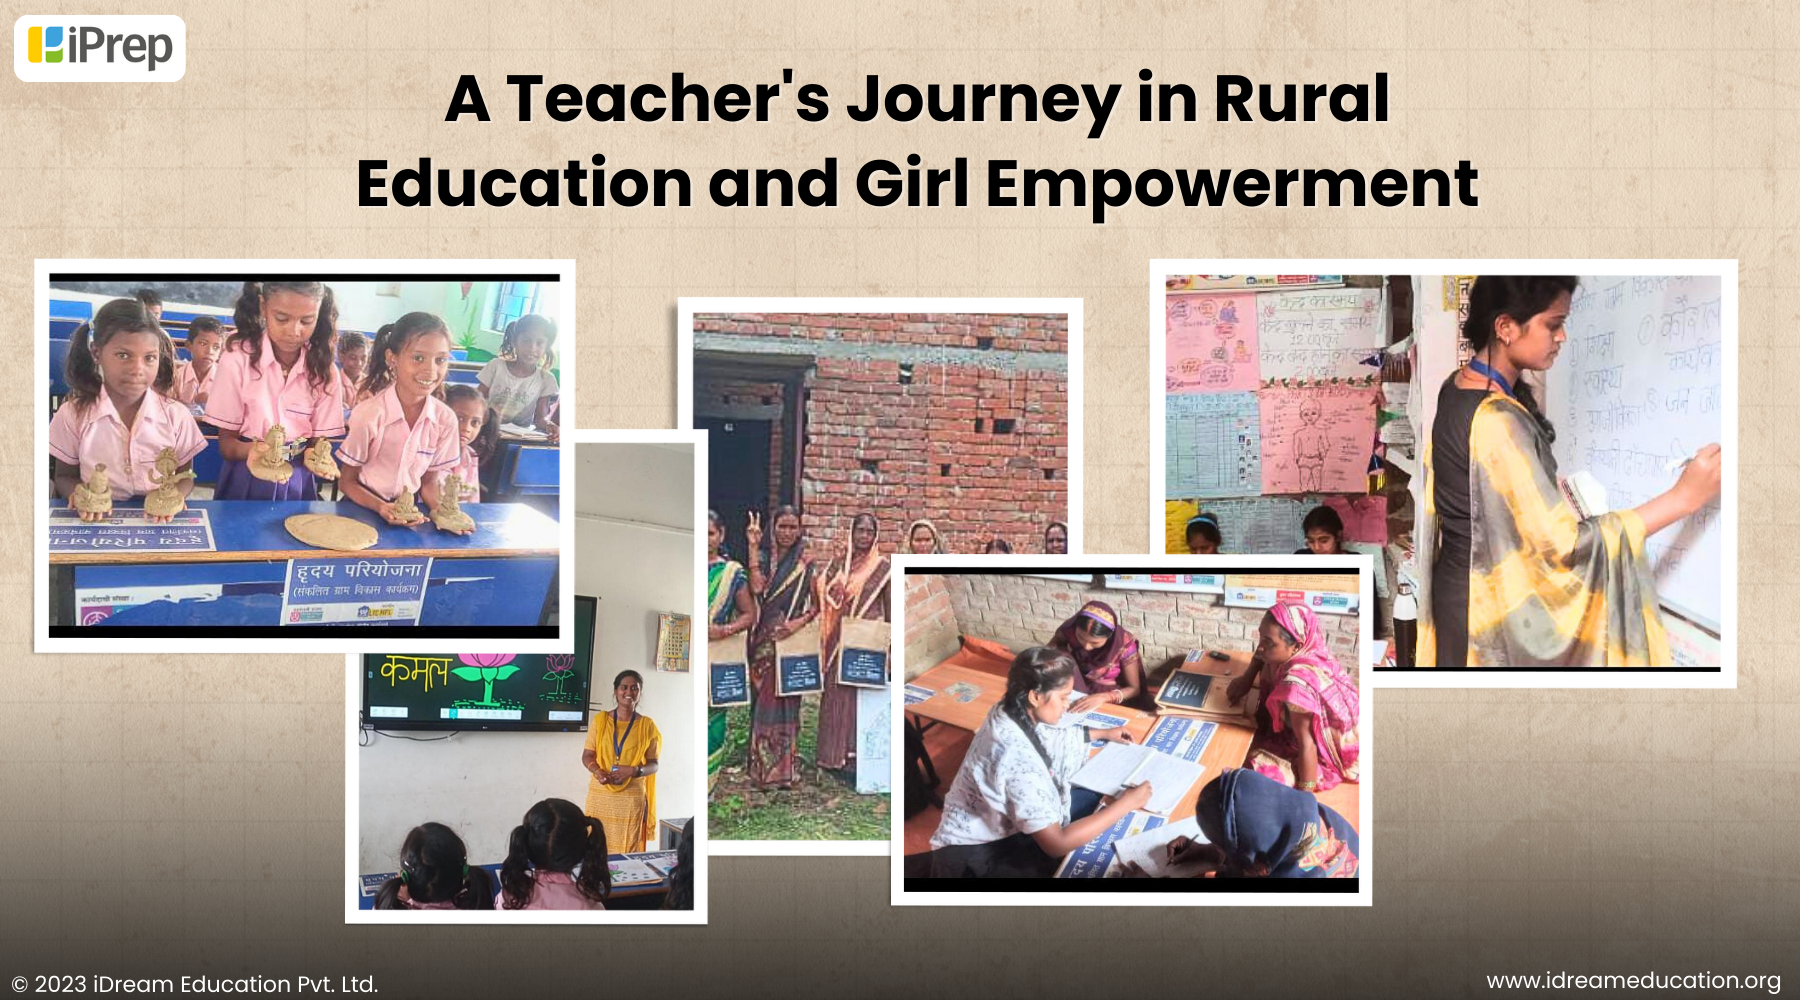 Glimpse of Inspiring journey of teacher to enhance rural education and empower girls, making a positive impact on students, girls, and women of Palamu Jharkhand